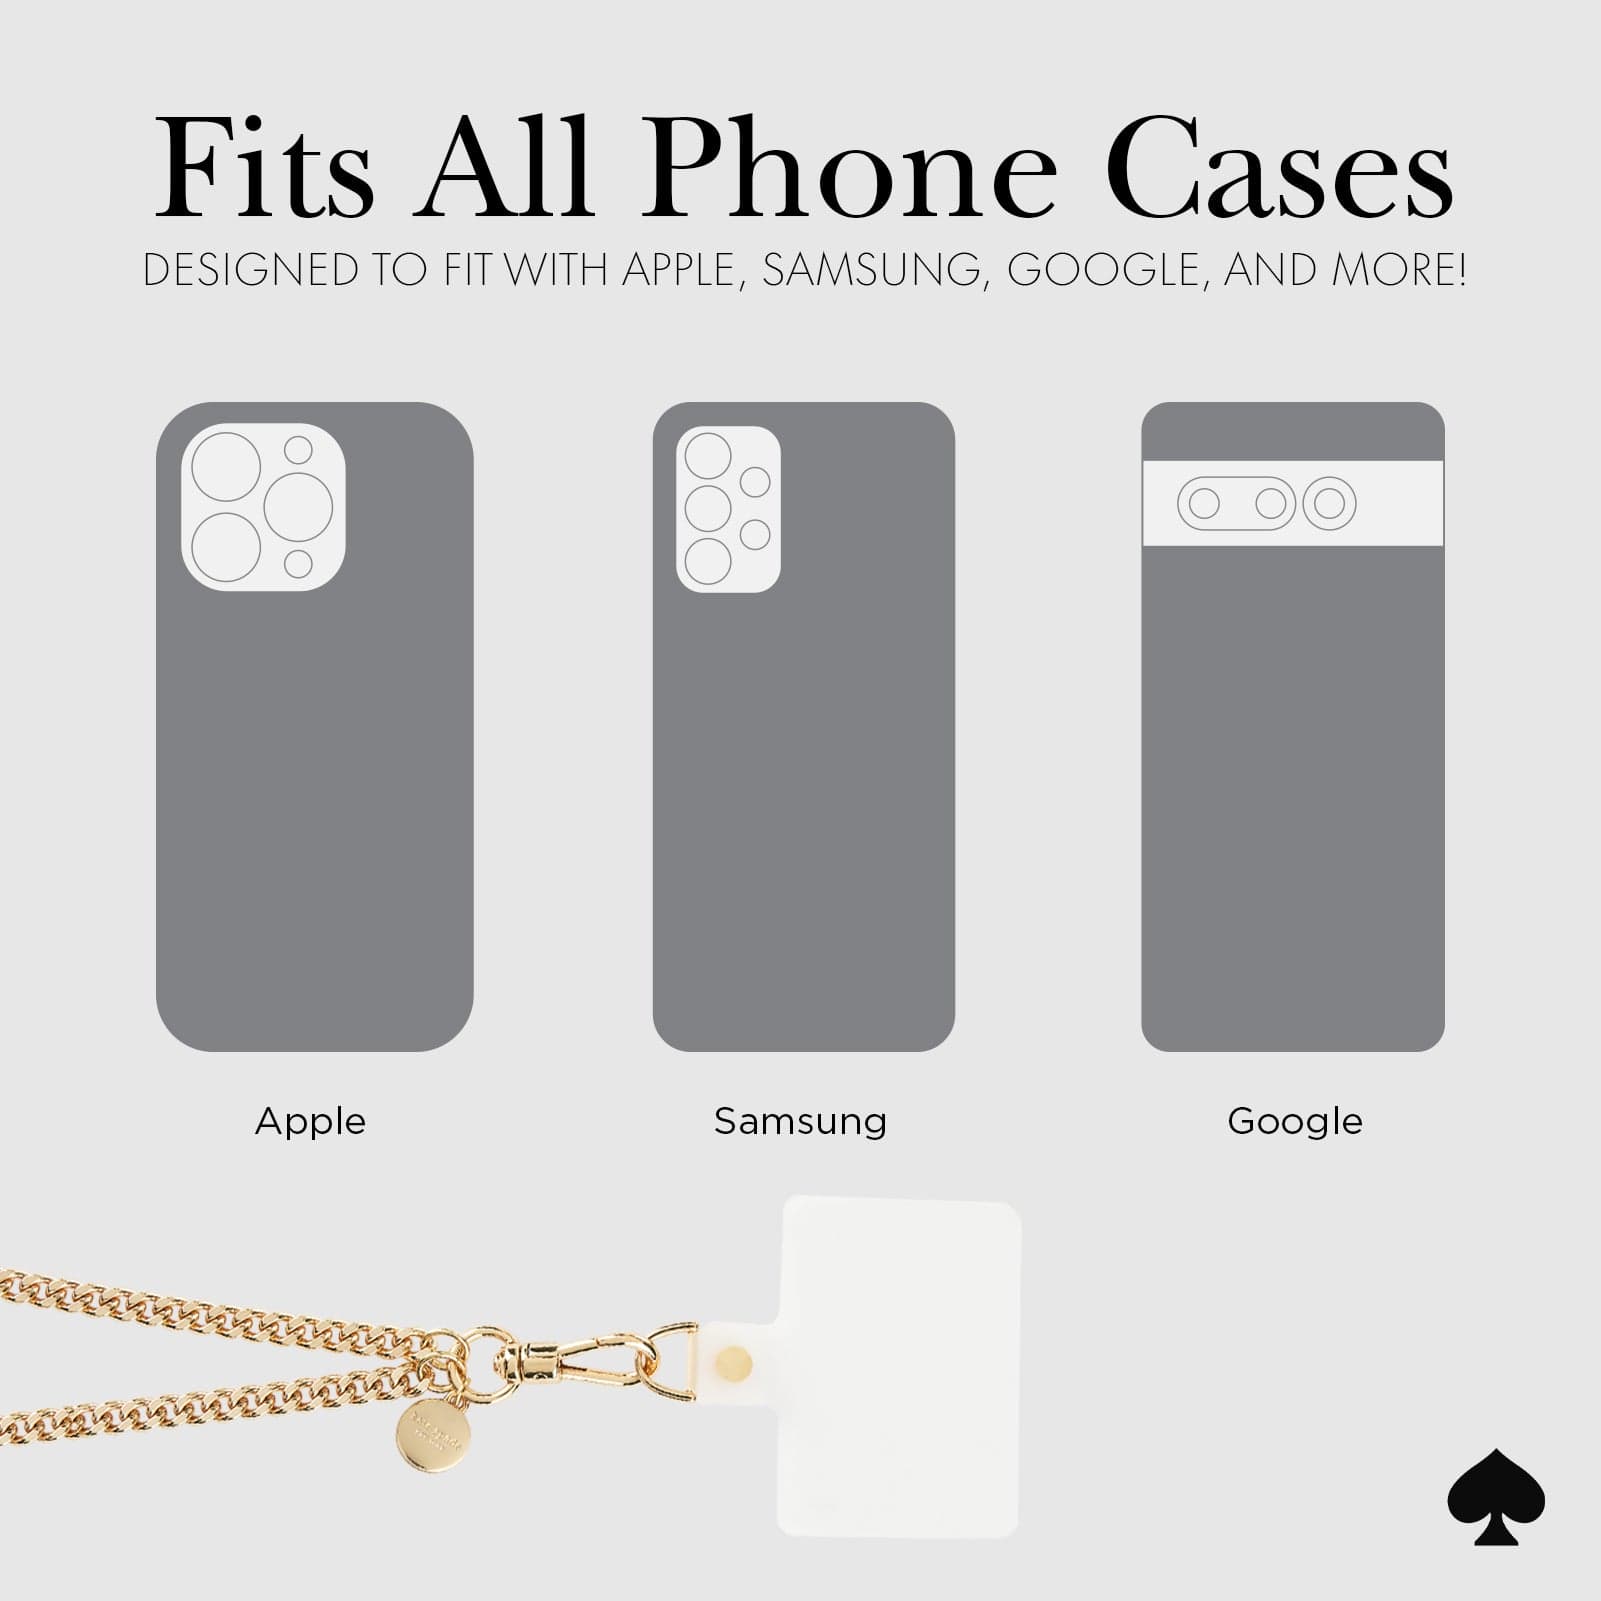 FITS ALL PHONE CASES DESIGNED TO FIT WITH APPLE, SAMSUNG, GOOGLE, AND MORE!